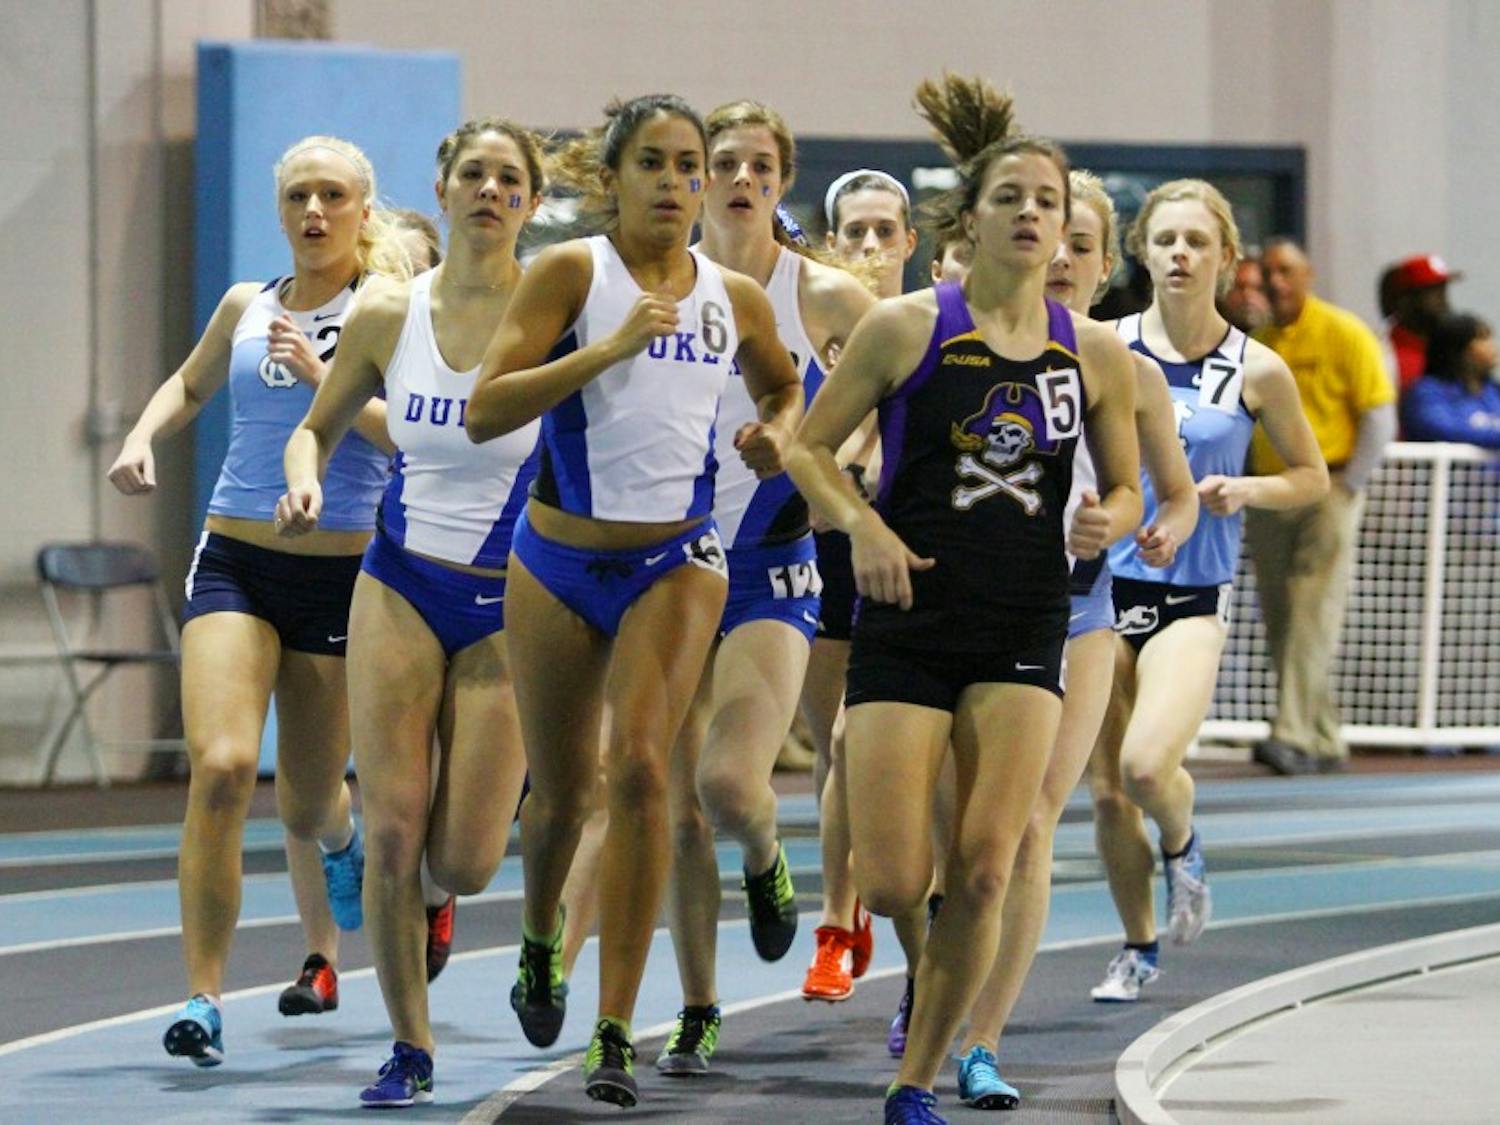 The Blue Devil women started their season strong at the Battle in Beantown, as they placed in the top 10 for the second-straight meet.